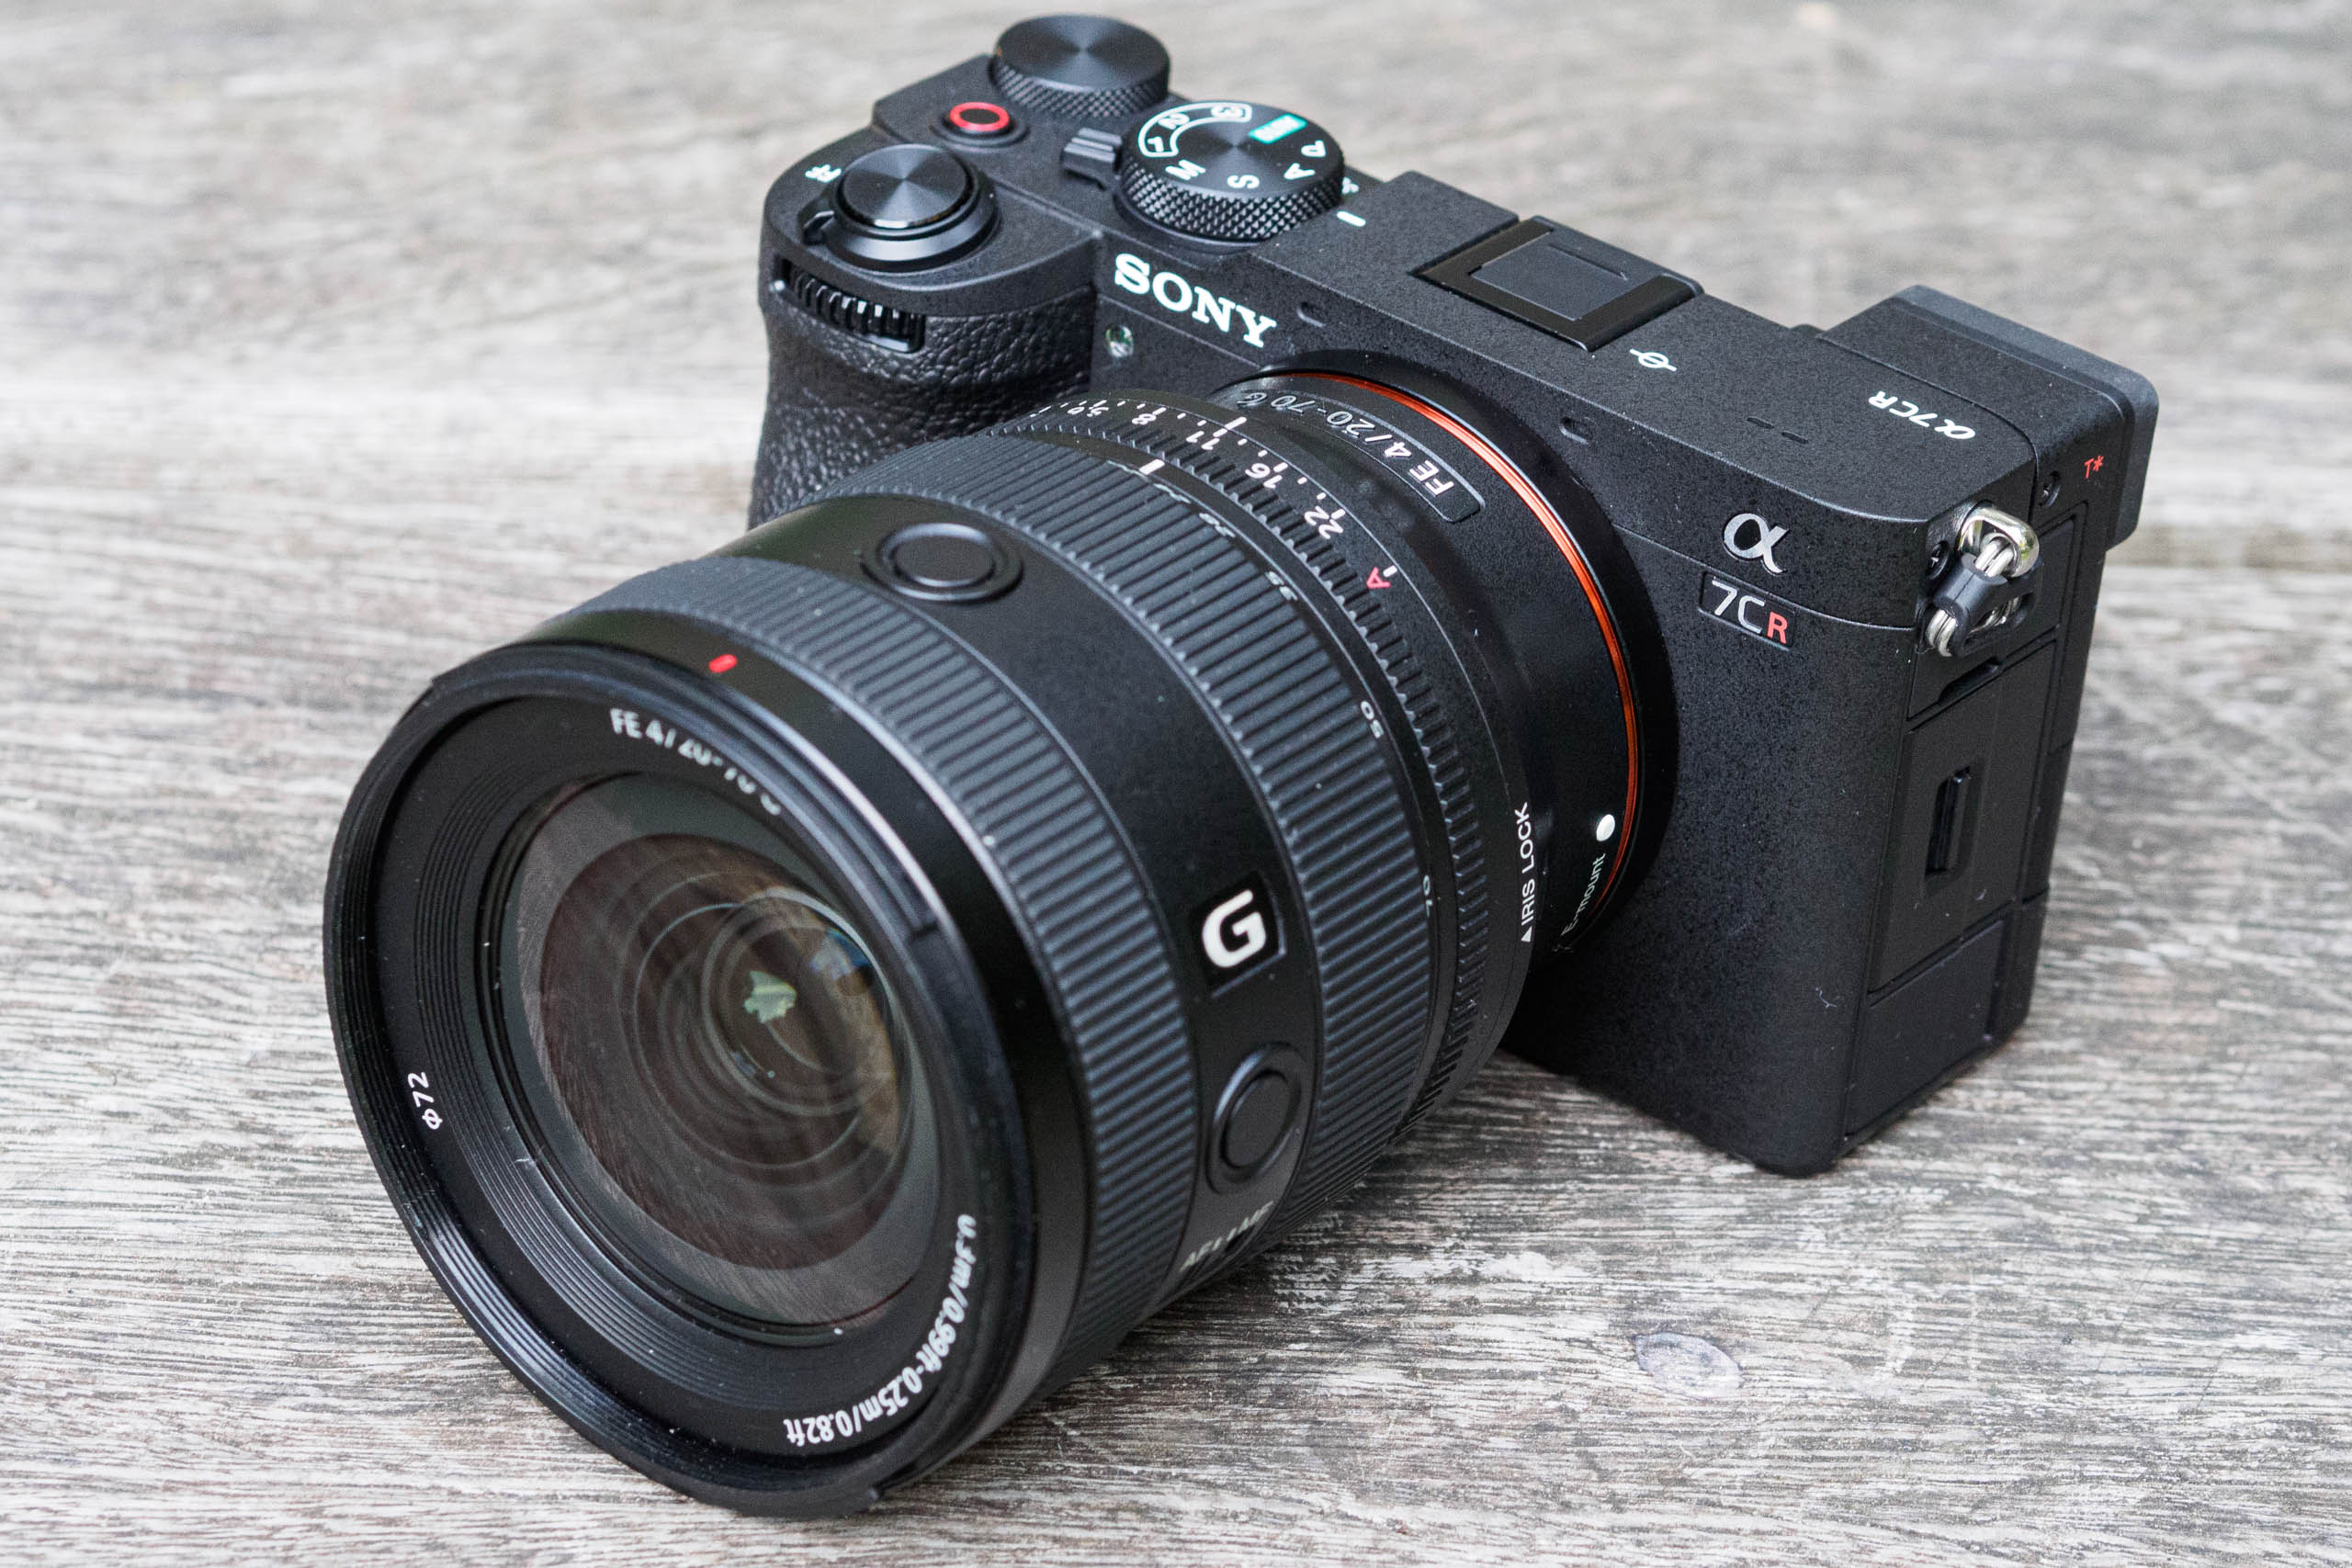 Sony Alpha A7CR in-depth review - Amateur Photographer